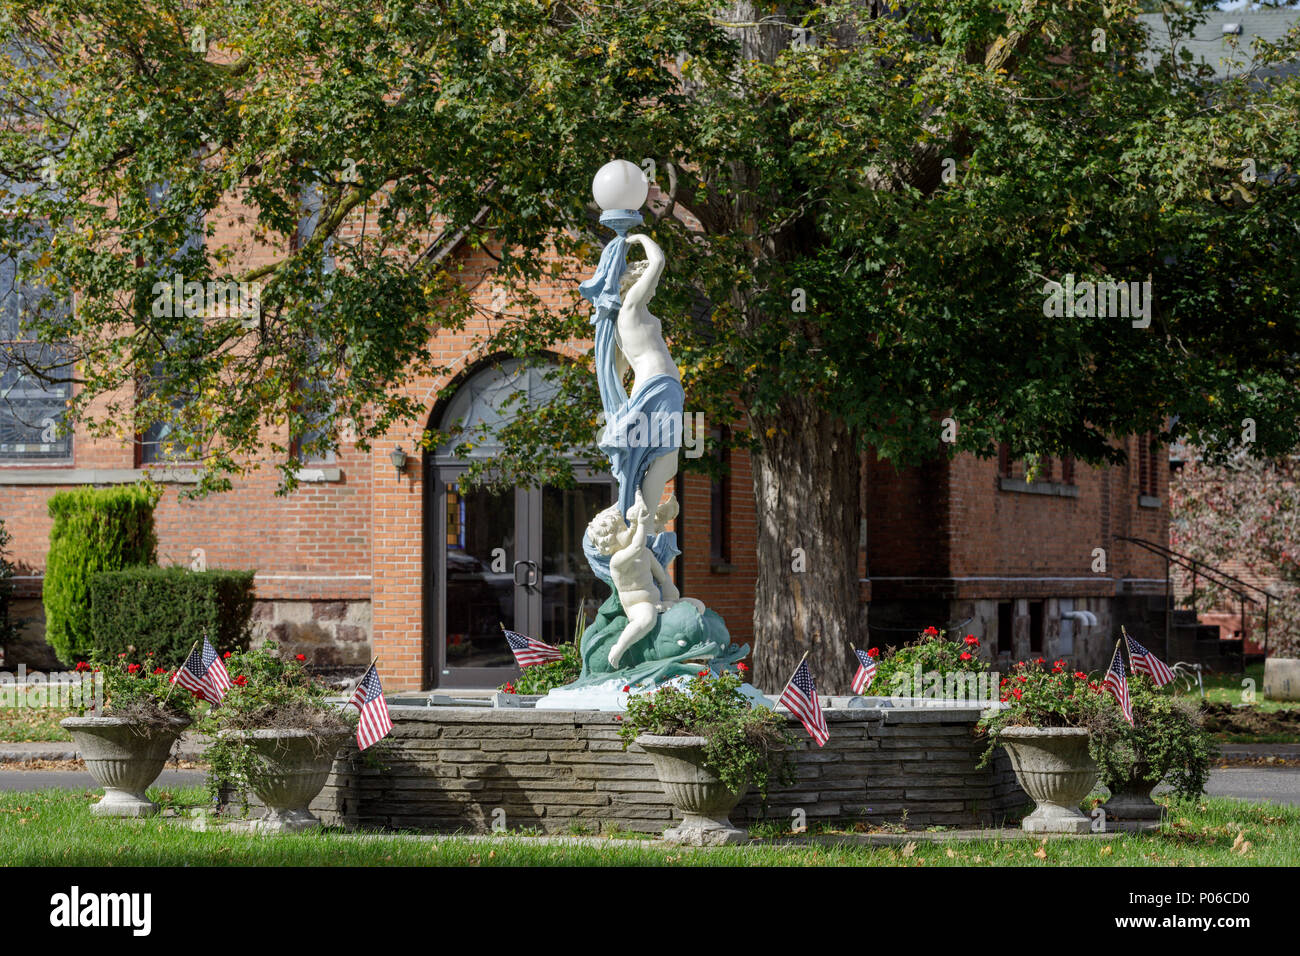 WOLCOTT, NY/USA - OCTOBER 19, 2017: Venus fountain is in the middle of the village of Wolcott, New York, in Wayne County, Finger Lakes region. Stock Photo